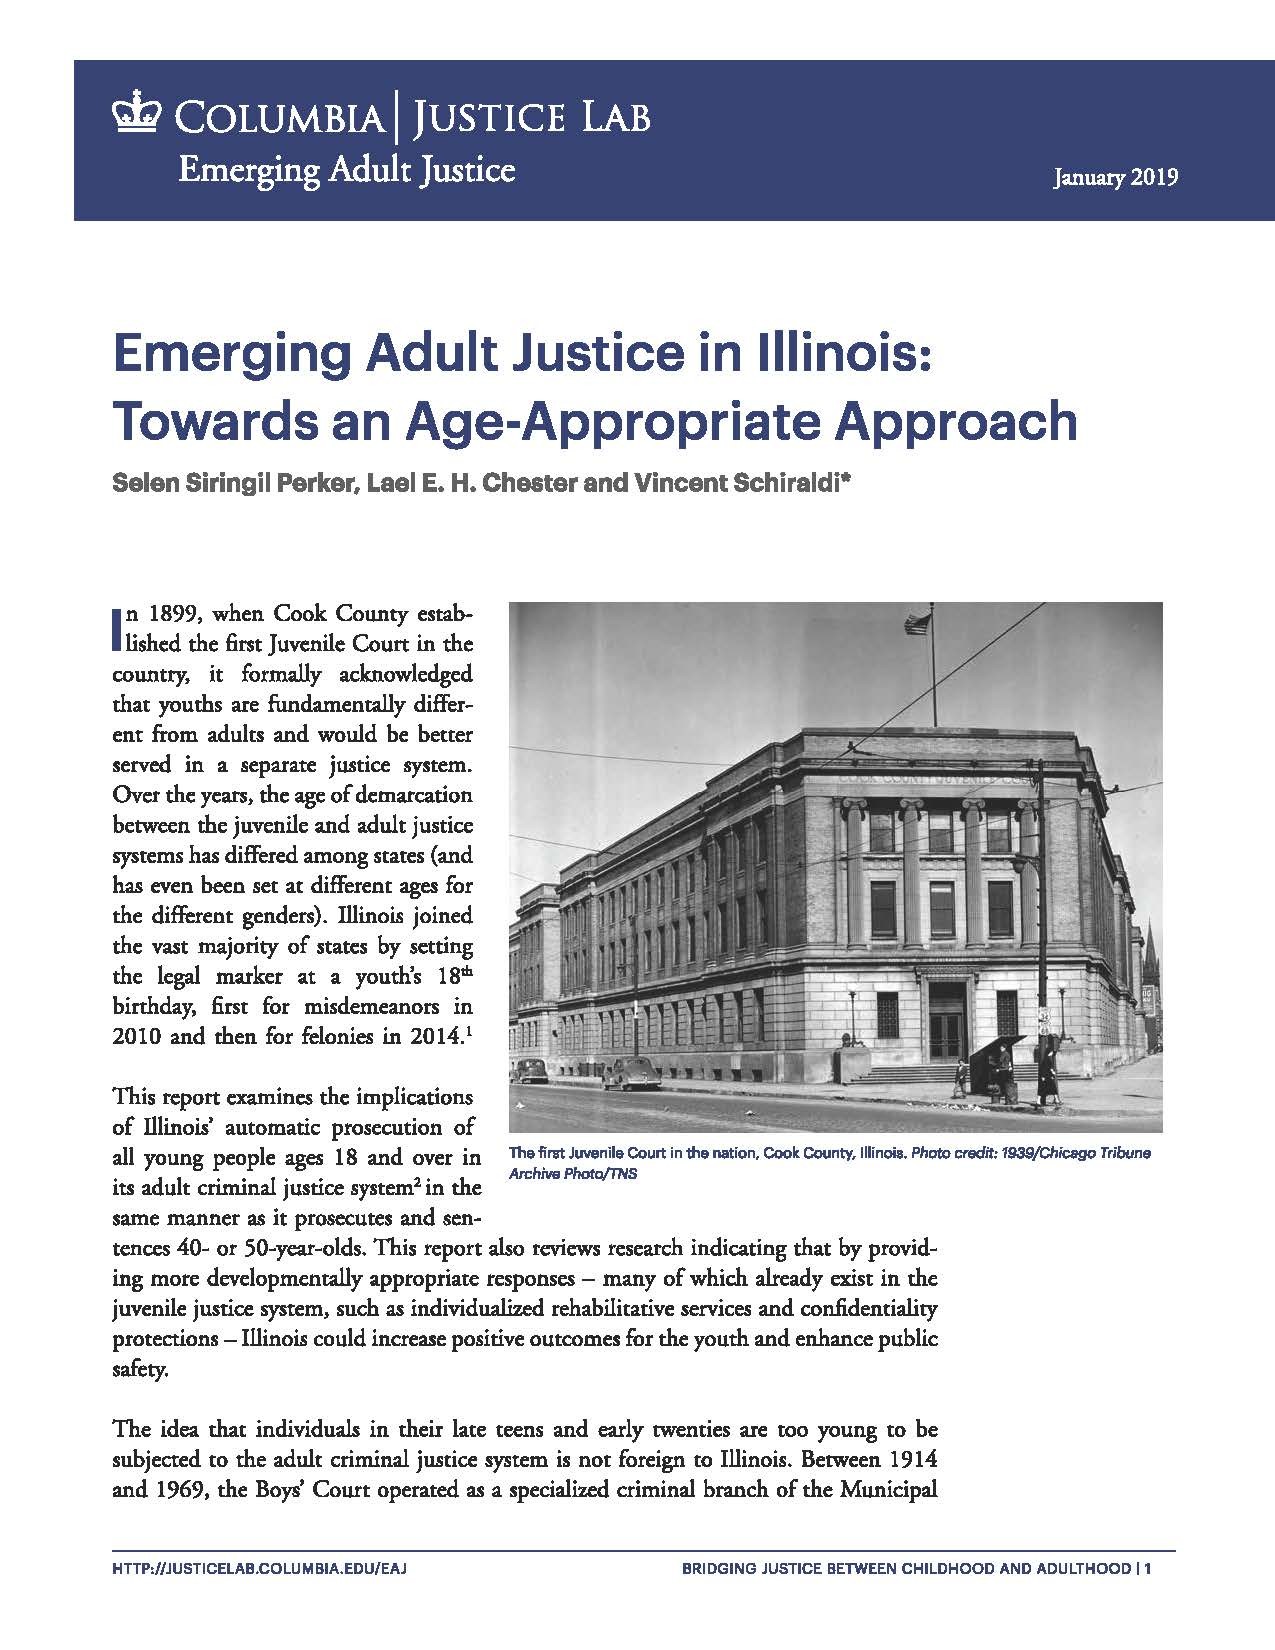 Emerging Adult Justice in Illinois: Towards an Age-Appropriate Approach